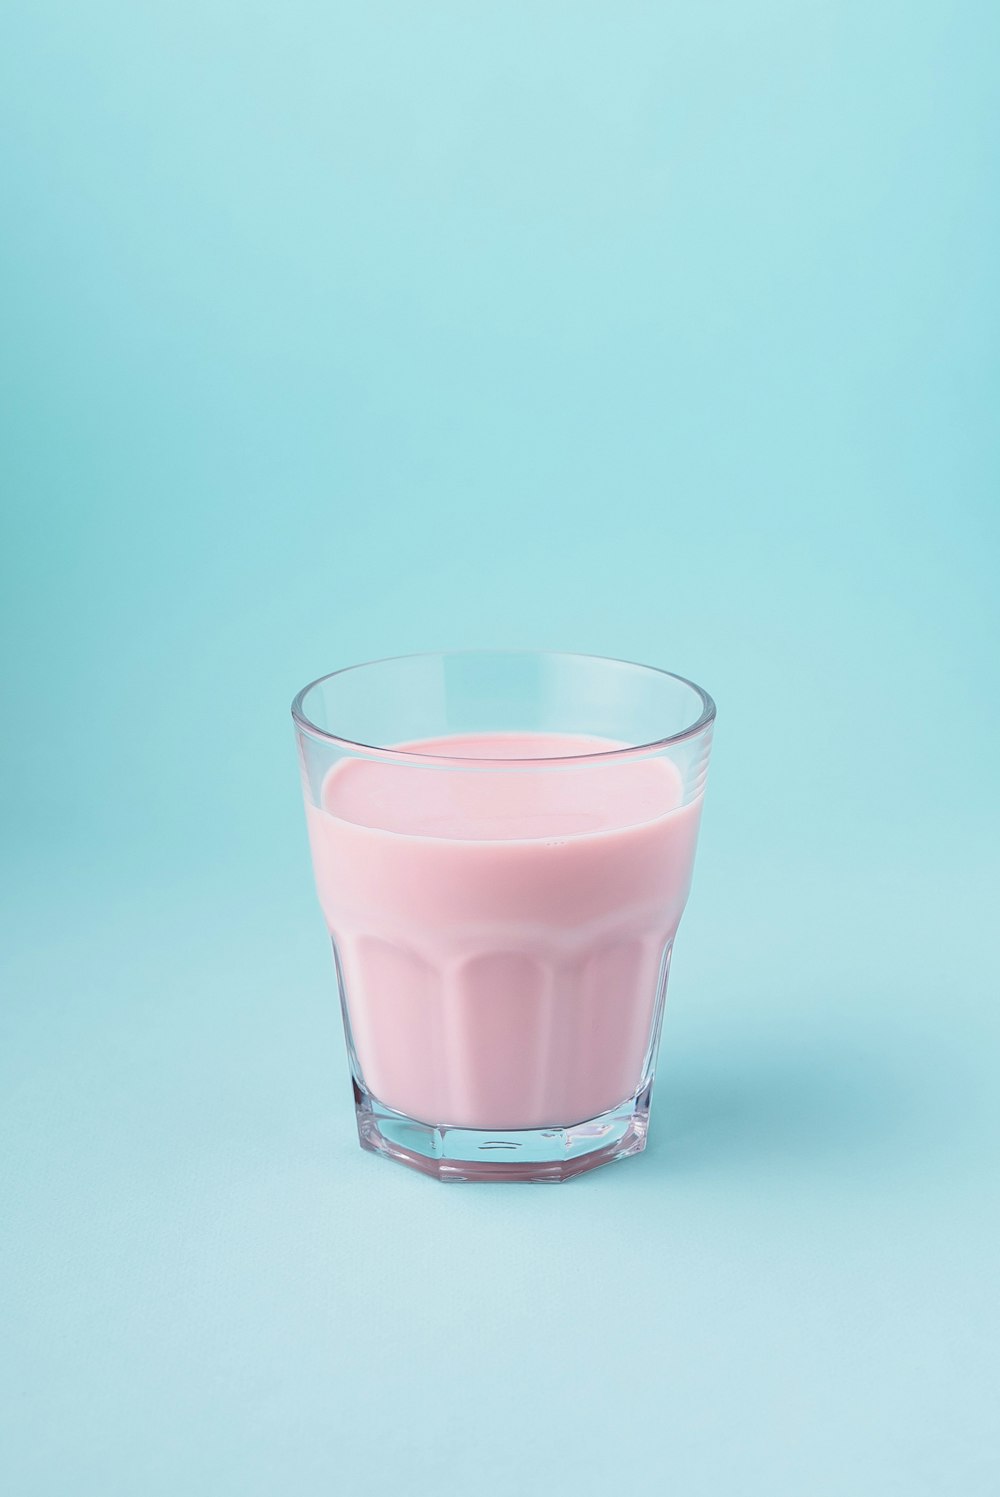 a glass of milk on a blue background